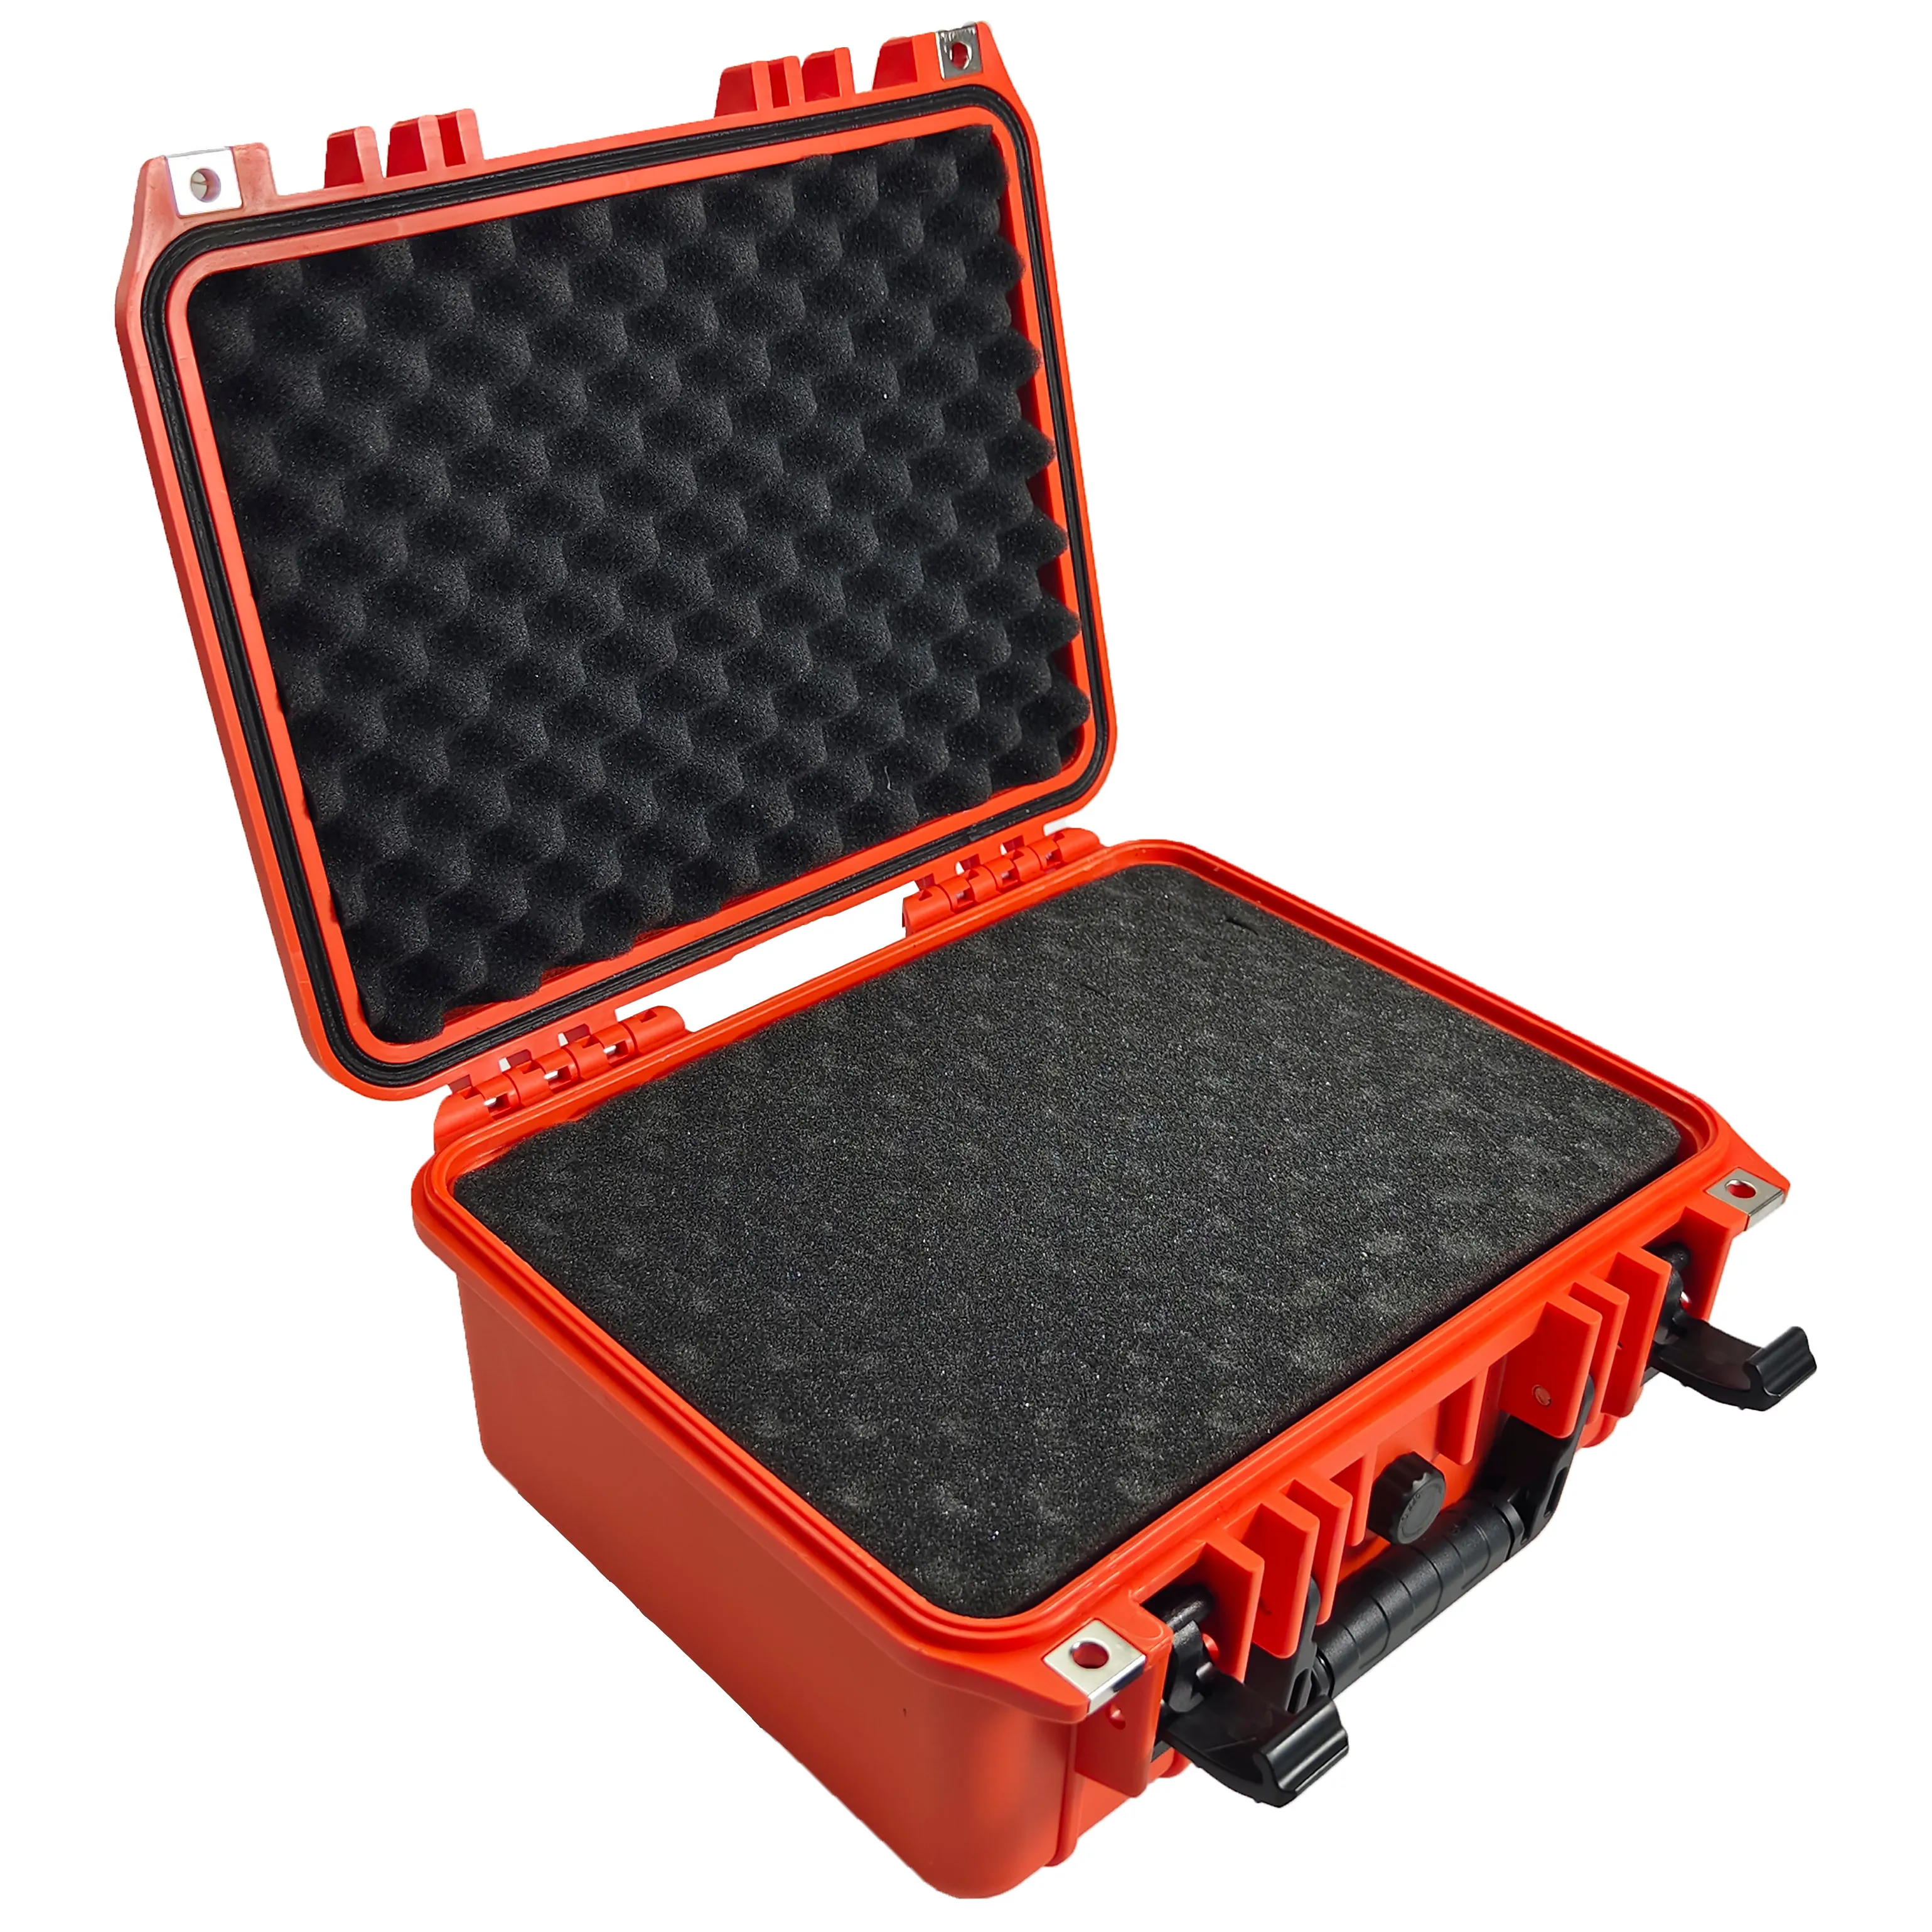 Professional Fast Safe And Reliable Plastic Tool Case Case Eva Heavy Duty Storage Box pelican protector cube case